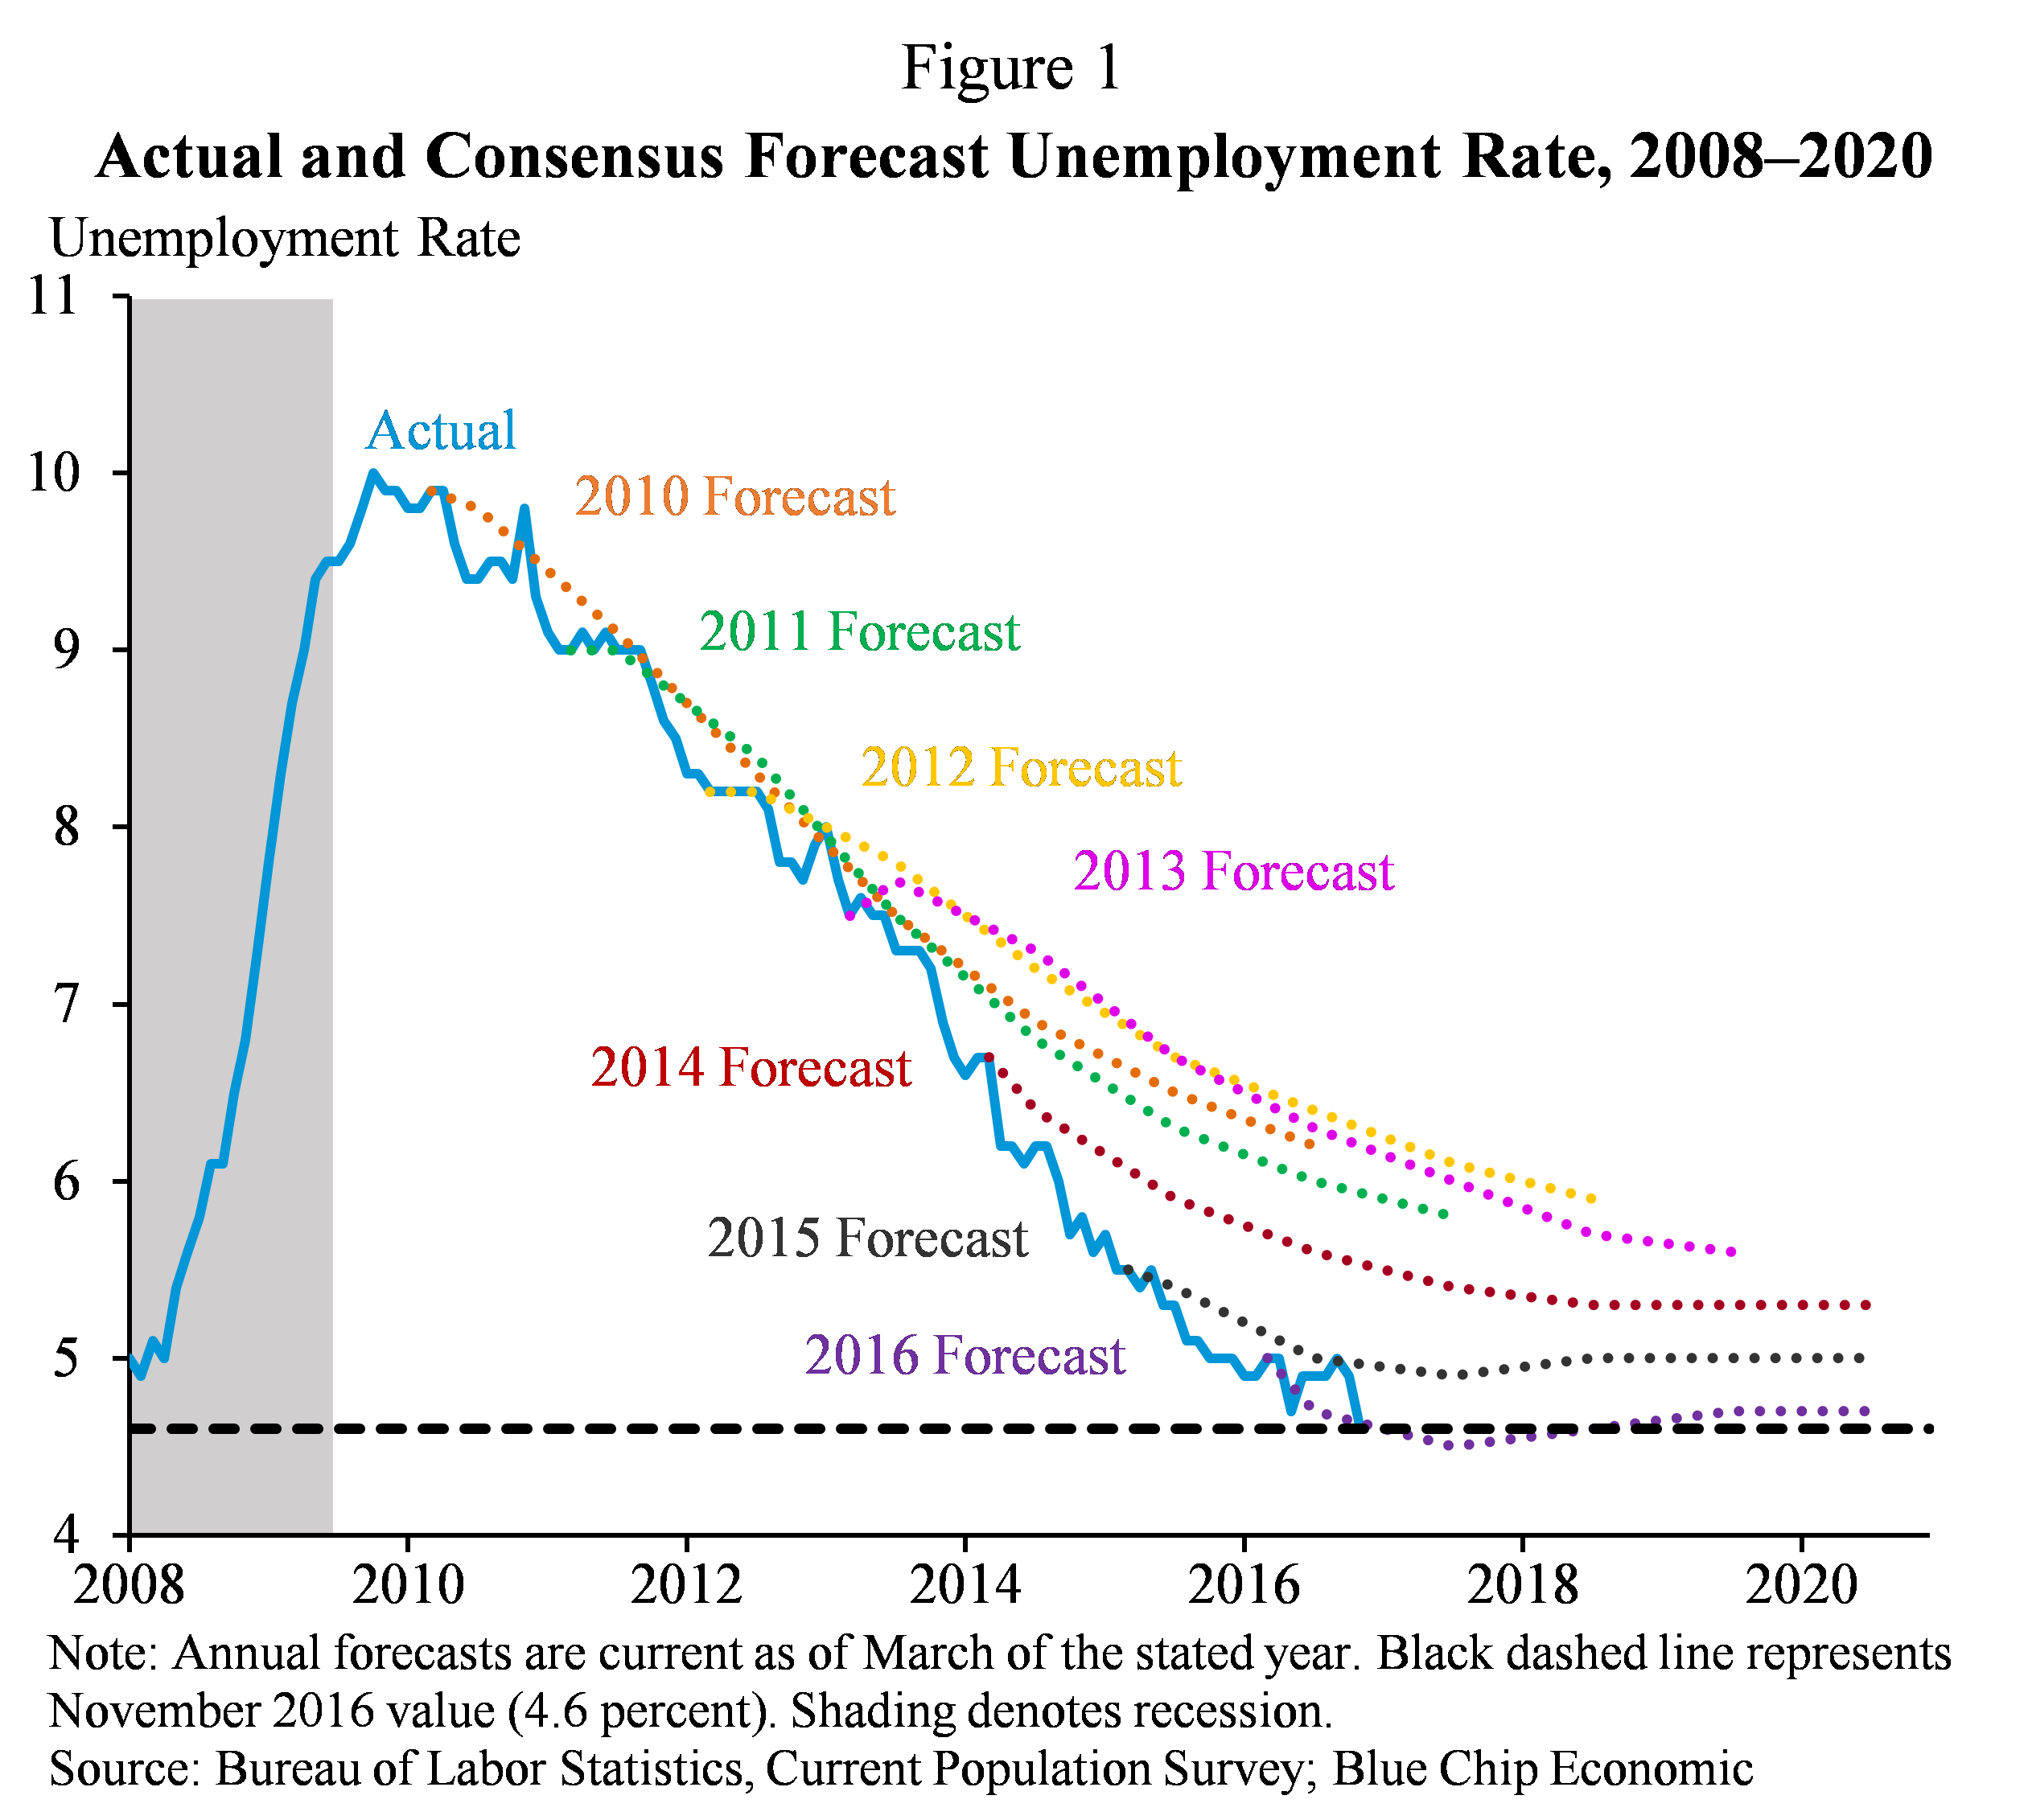 Figure 1.  Actual and Consensus Forecast Unemployment Rate, 2008-2020